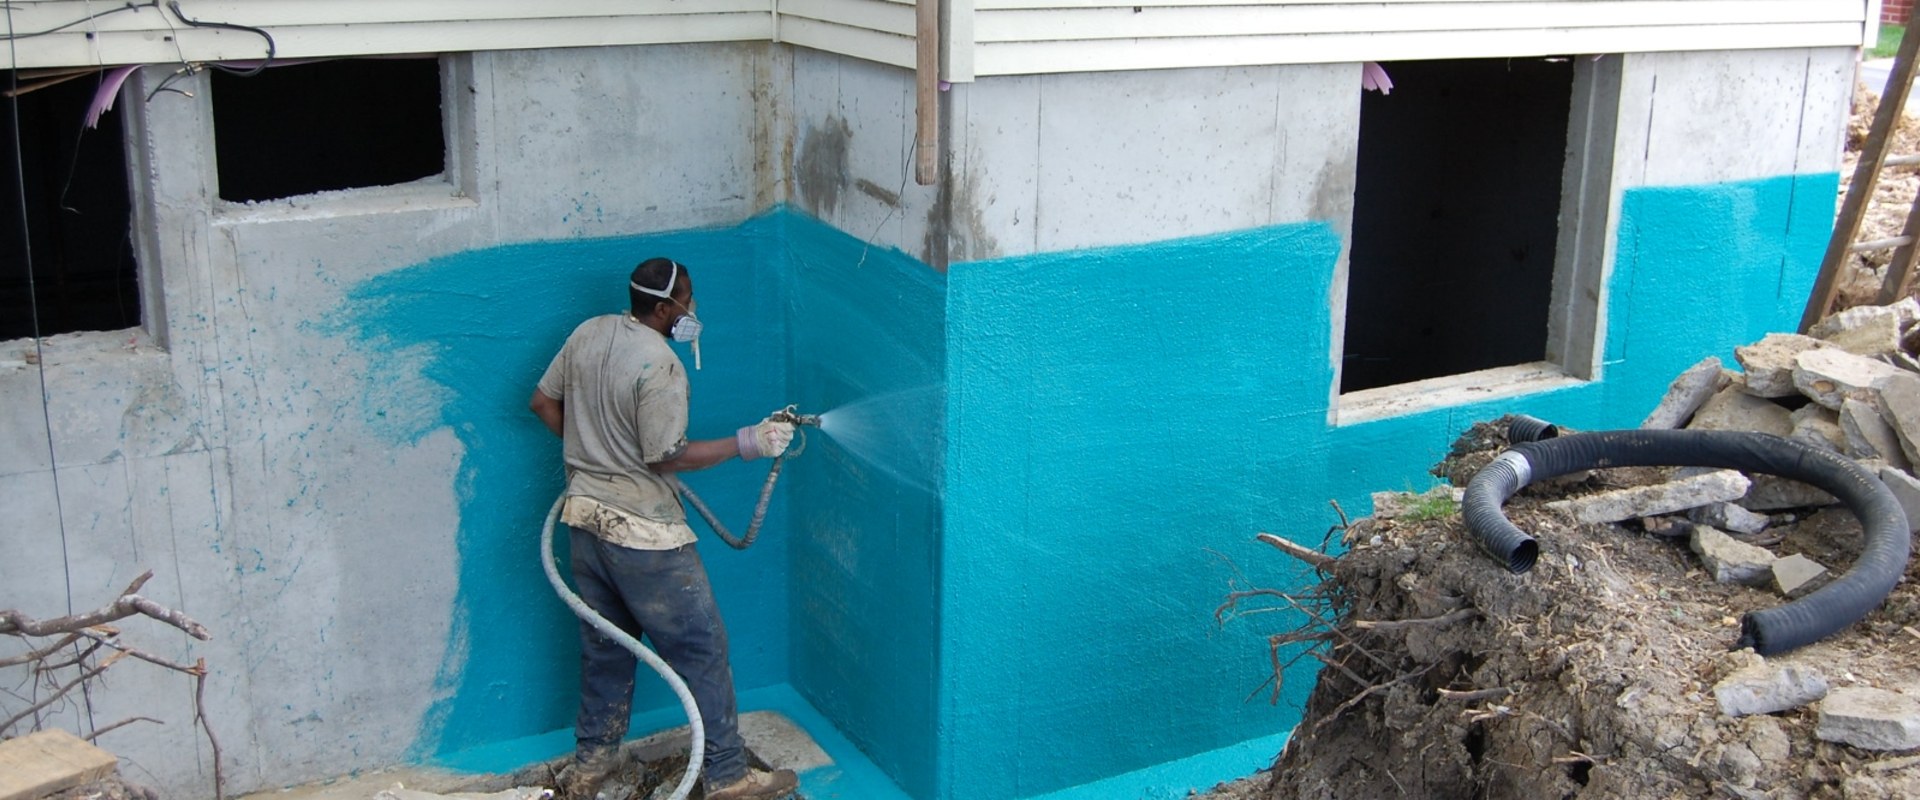 Toronto Homeowners: Why Mold Inspection And Foundation Waterproofing Are Essential